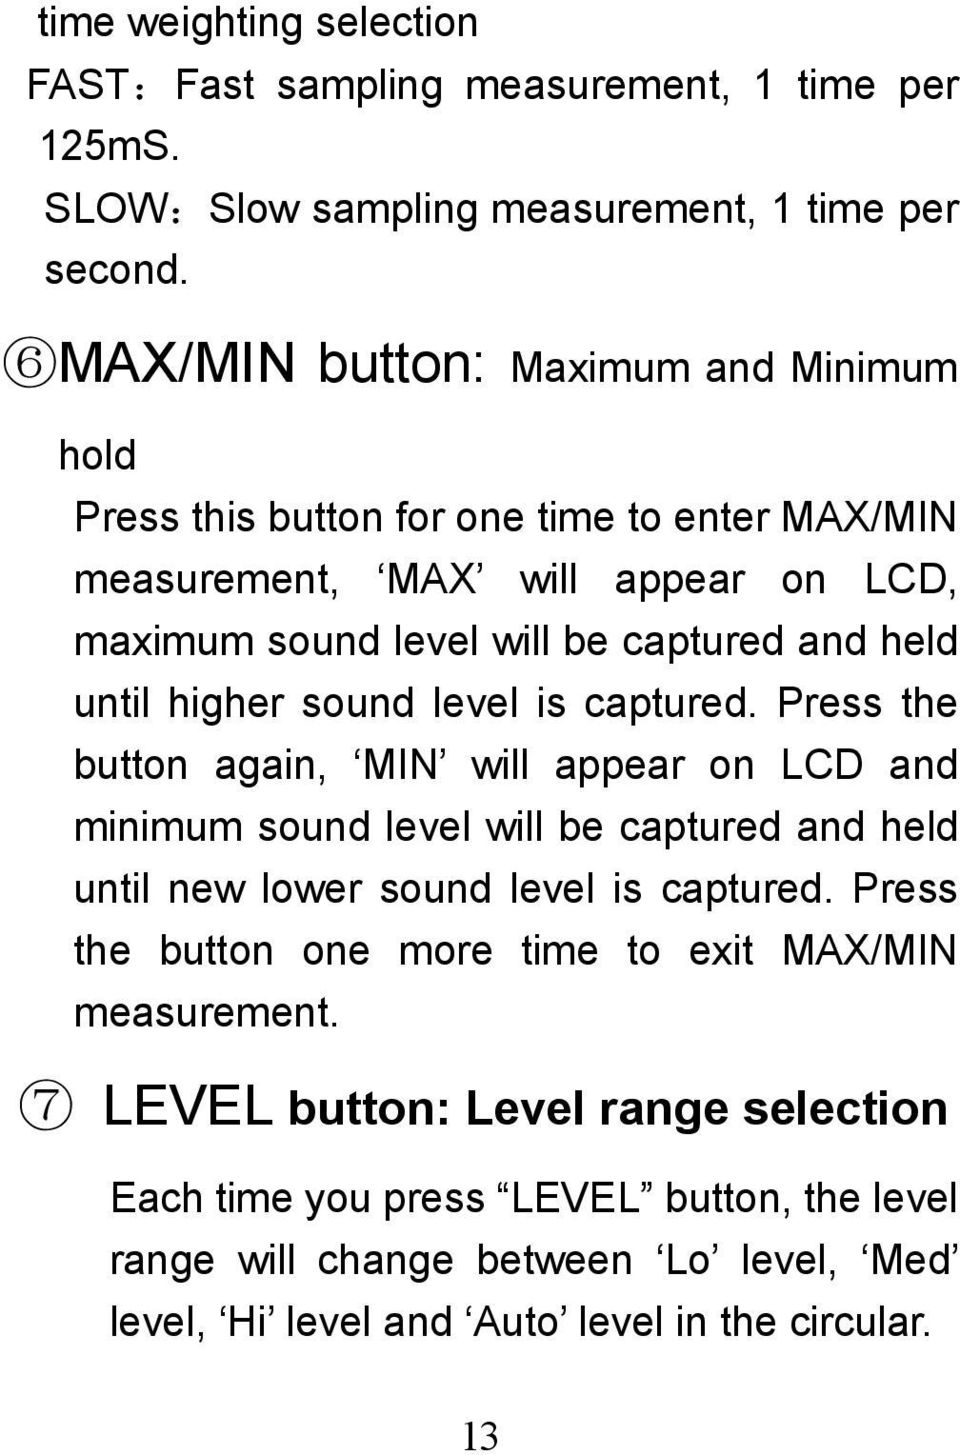 until higher sound level is captured. Press the button again, MIN will appear on LCD and minimum sound level will be captured and held until new lower sound level is captured.